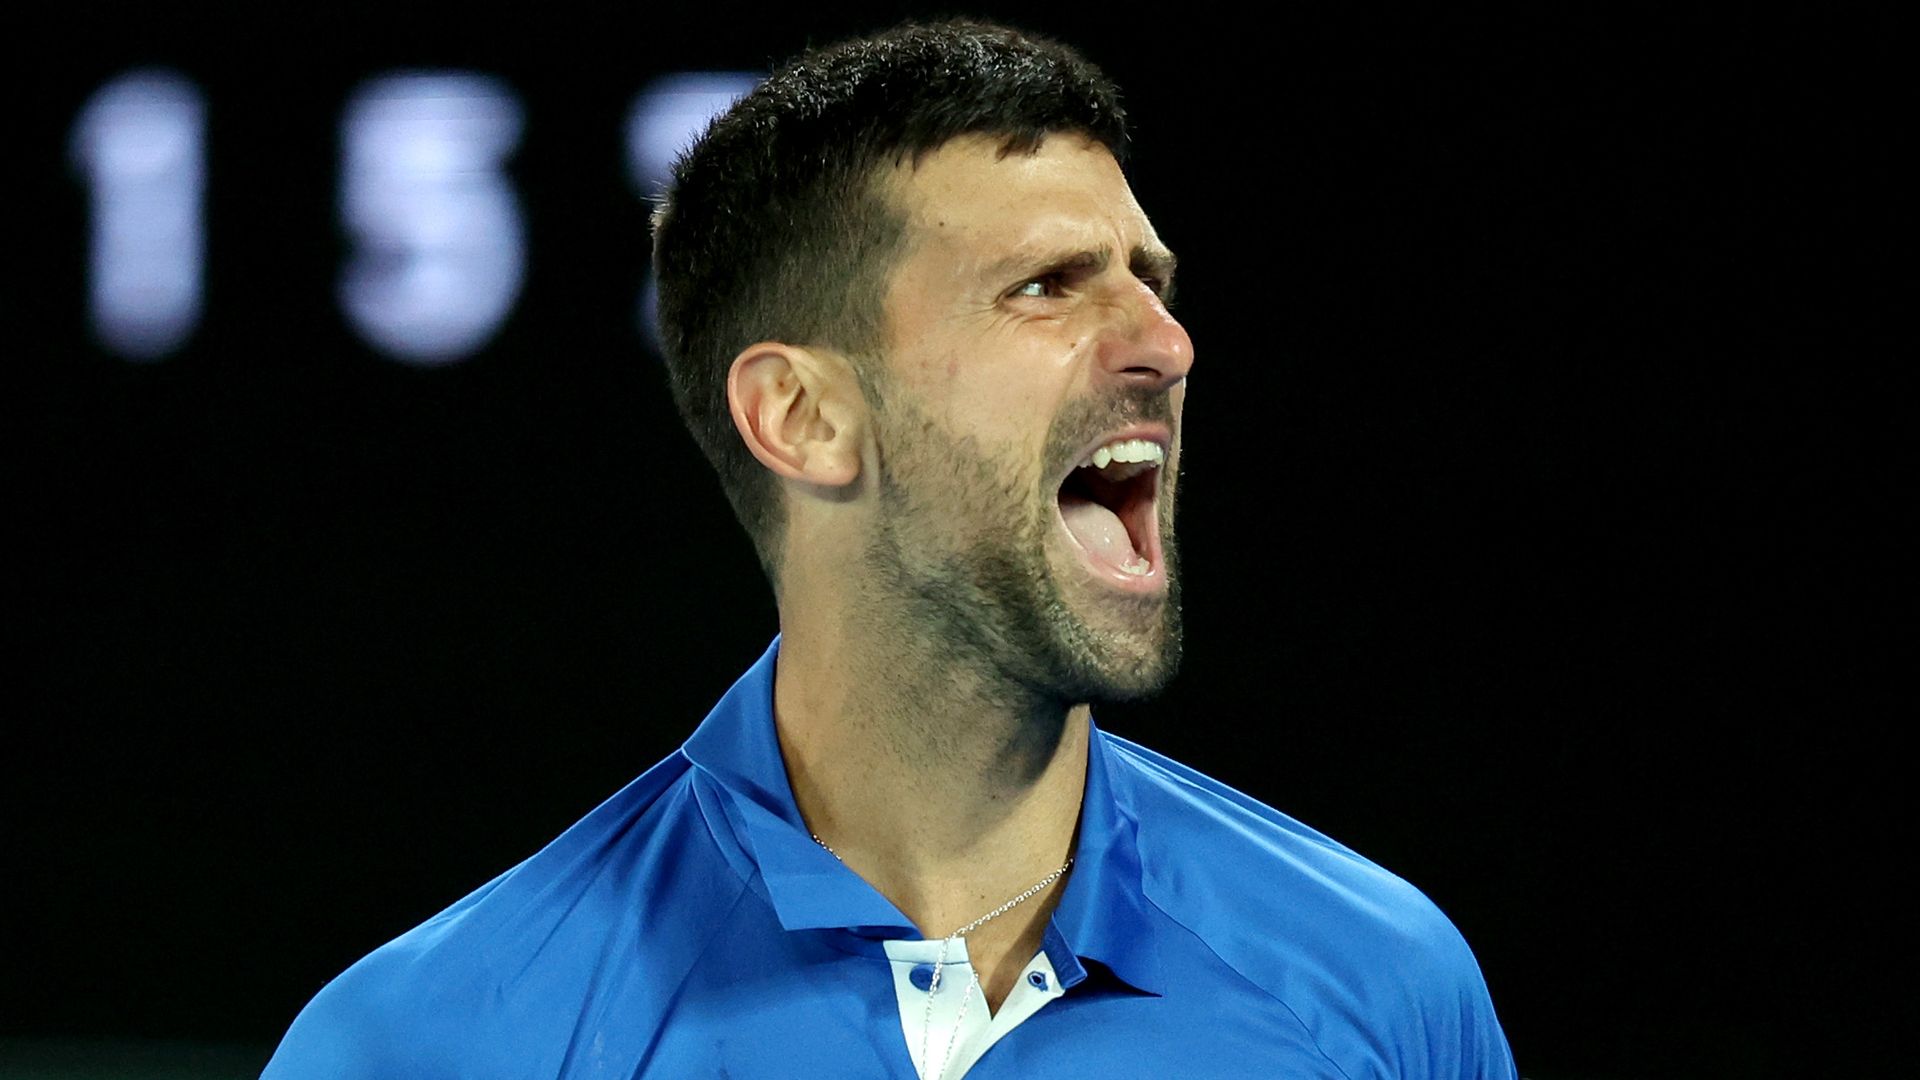 Djokovic battles through in Melbourne and calls out heckler